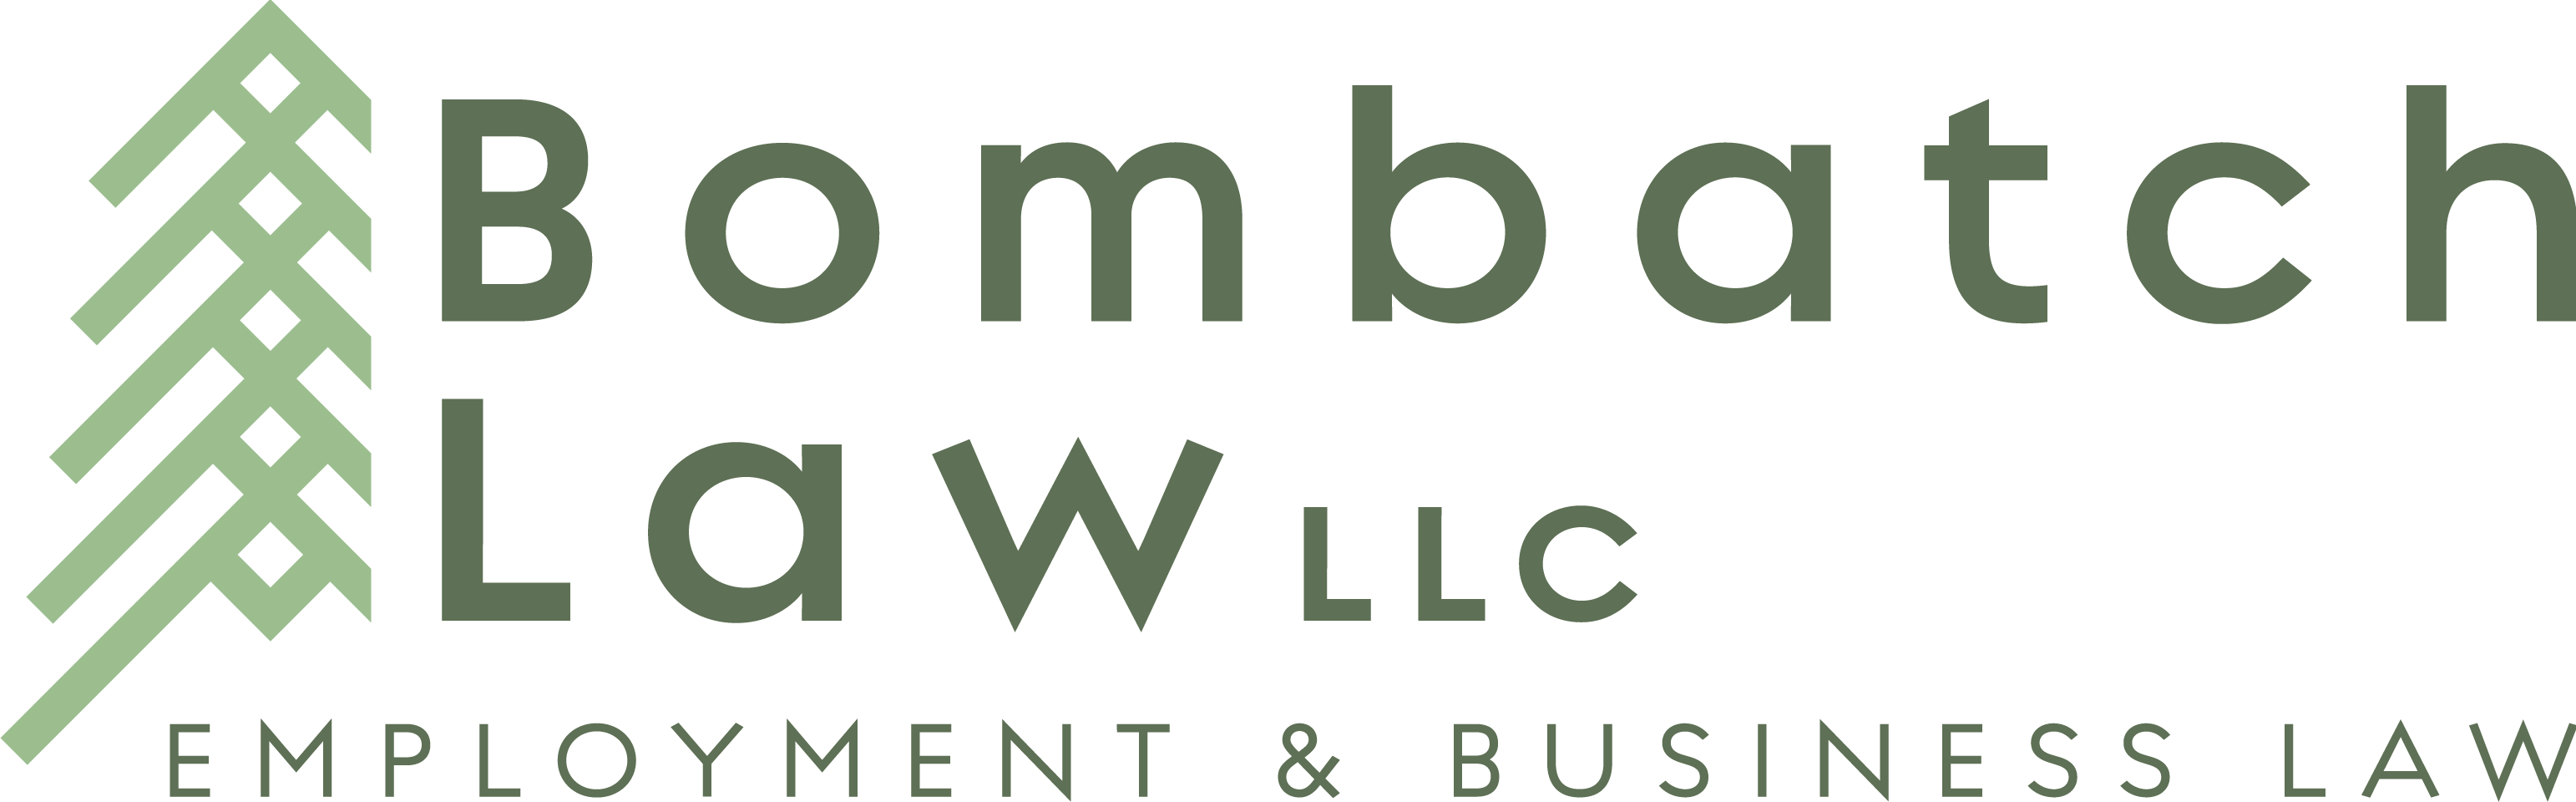 Bombatch Law, LLC - Employment and Business Law